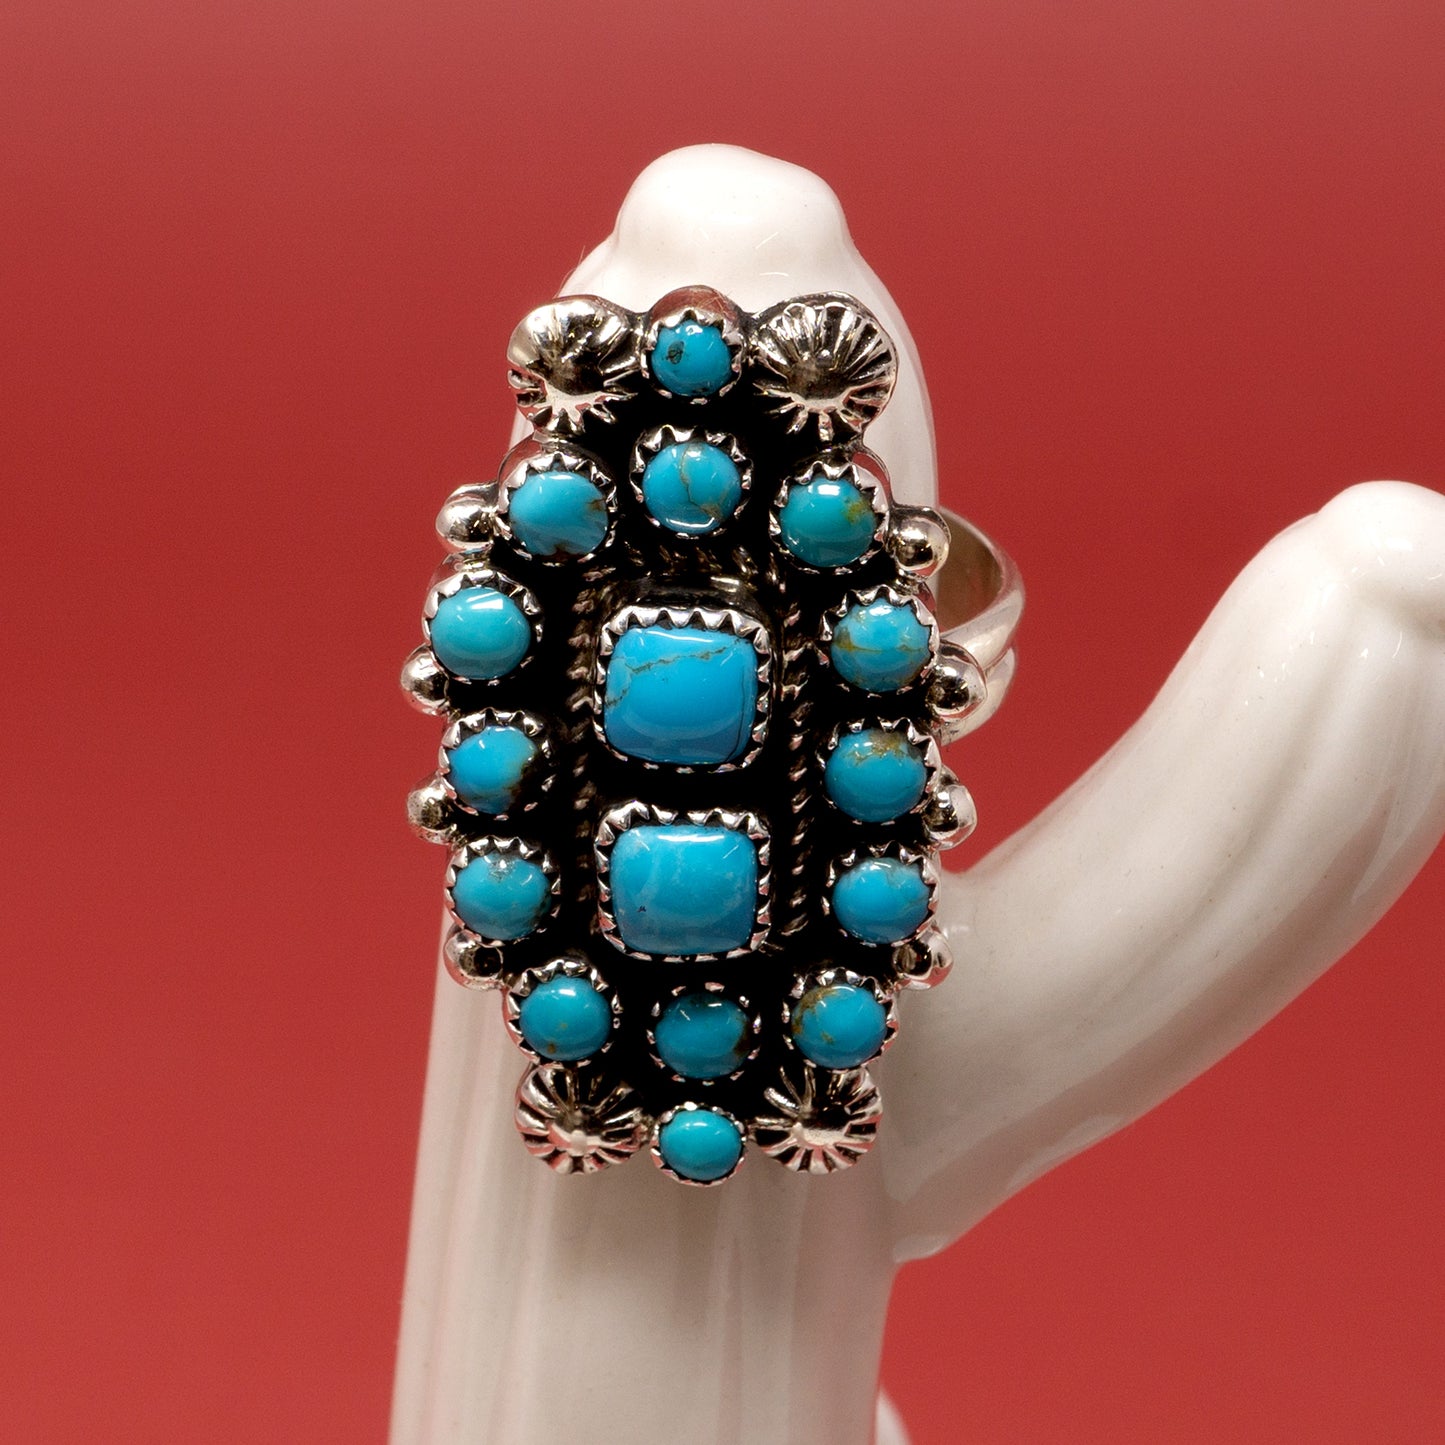 16 Sleeping Beauty Turquoise Cabochons in Classic Setting | Adjustable Band Ring